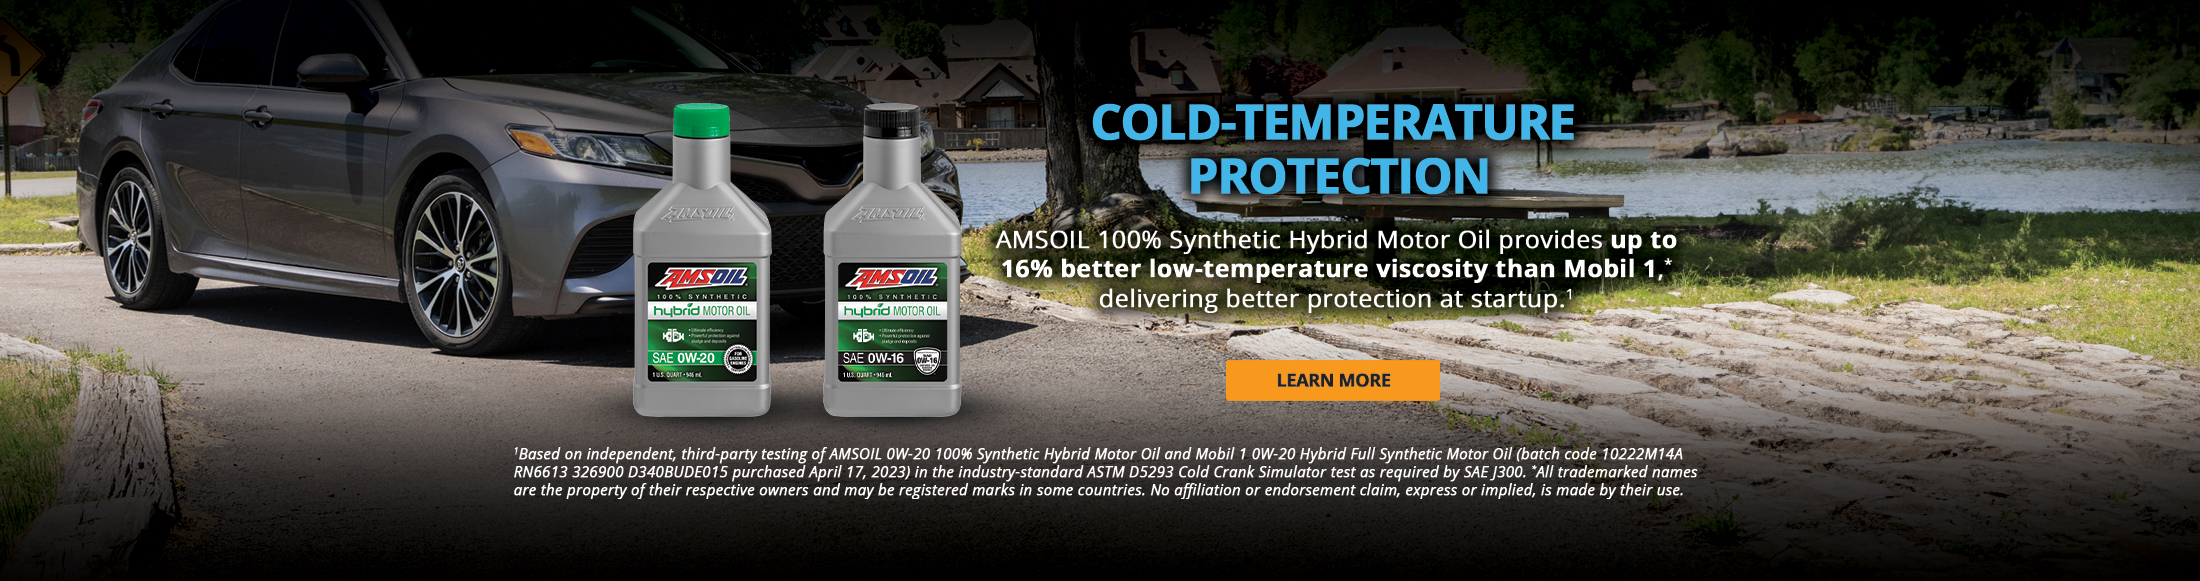 AMSOIL INC. (@amsoilinc) • Instagram photos and videos